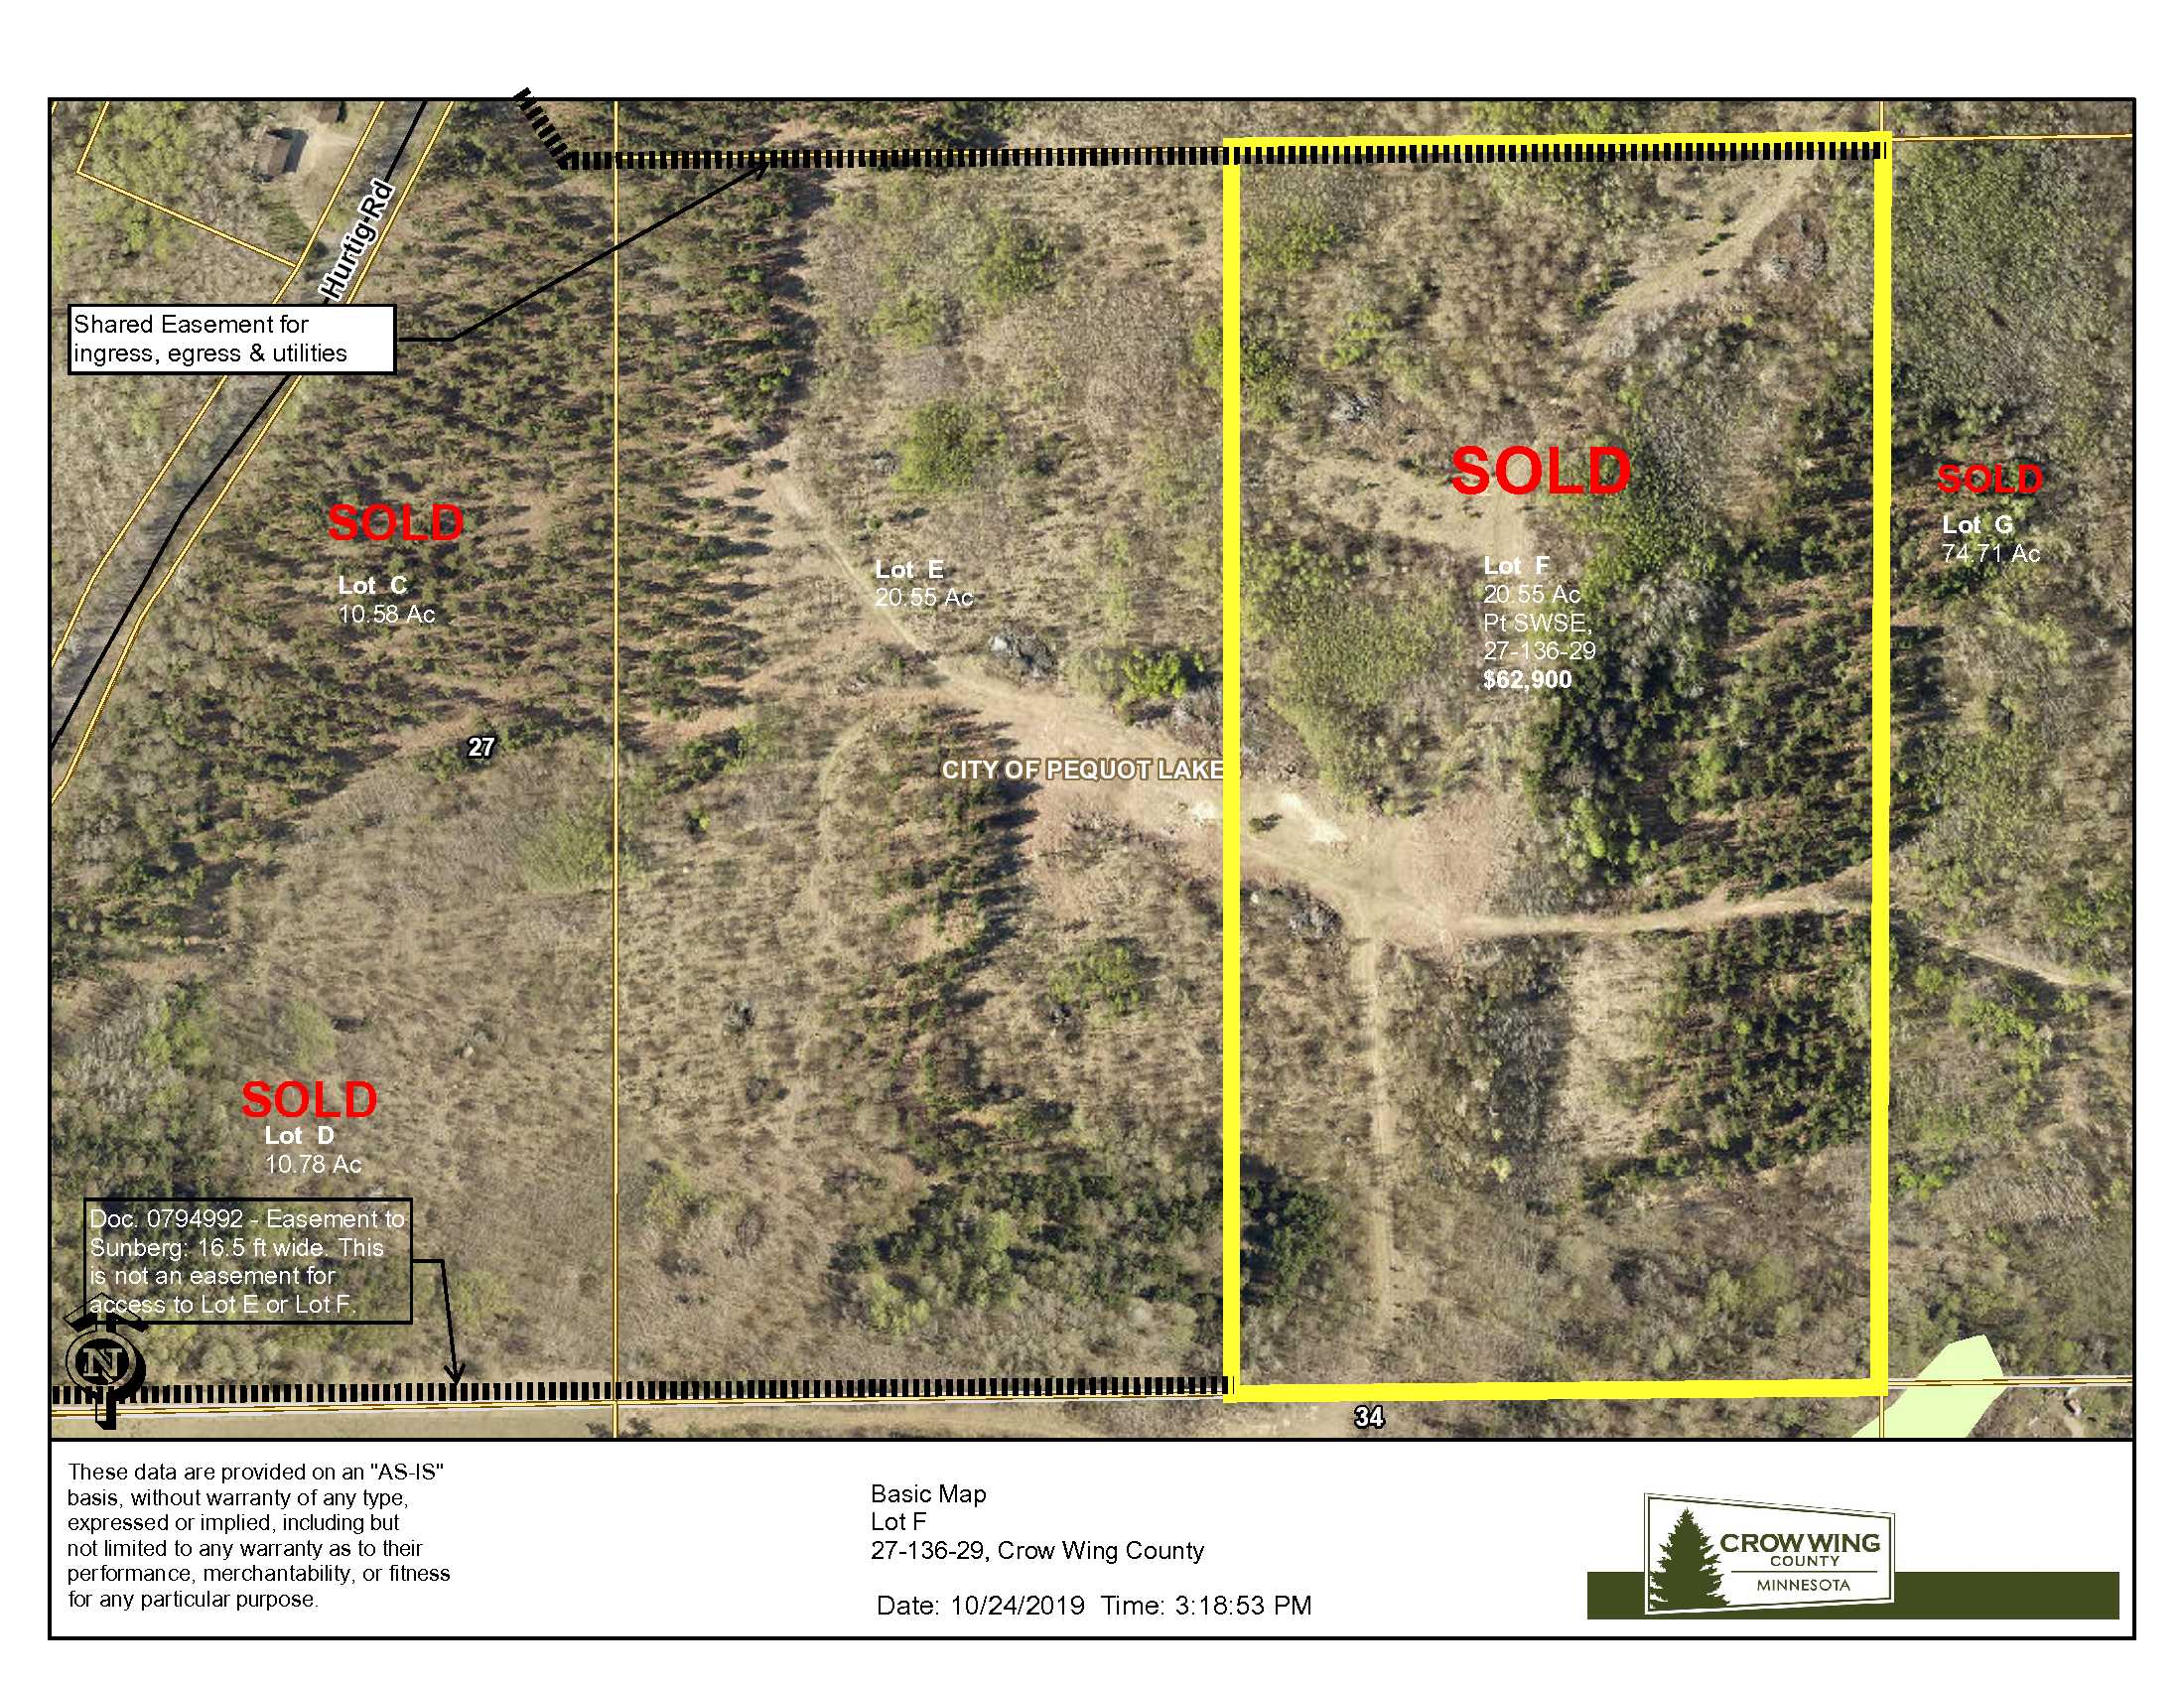 Lot F, 27-136-29, TBD Hurtig Rd, Pequot Lakes, Crow Wing Co